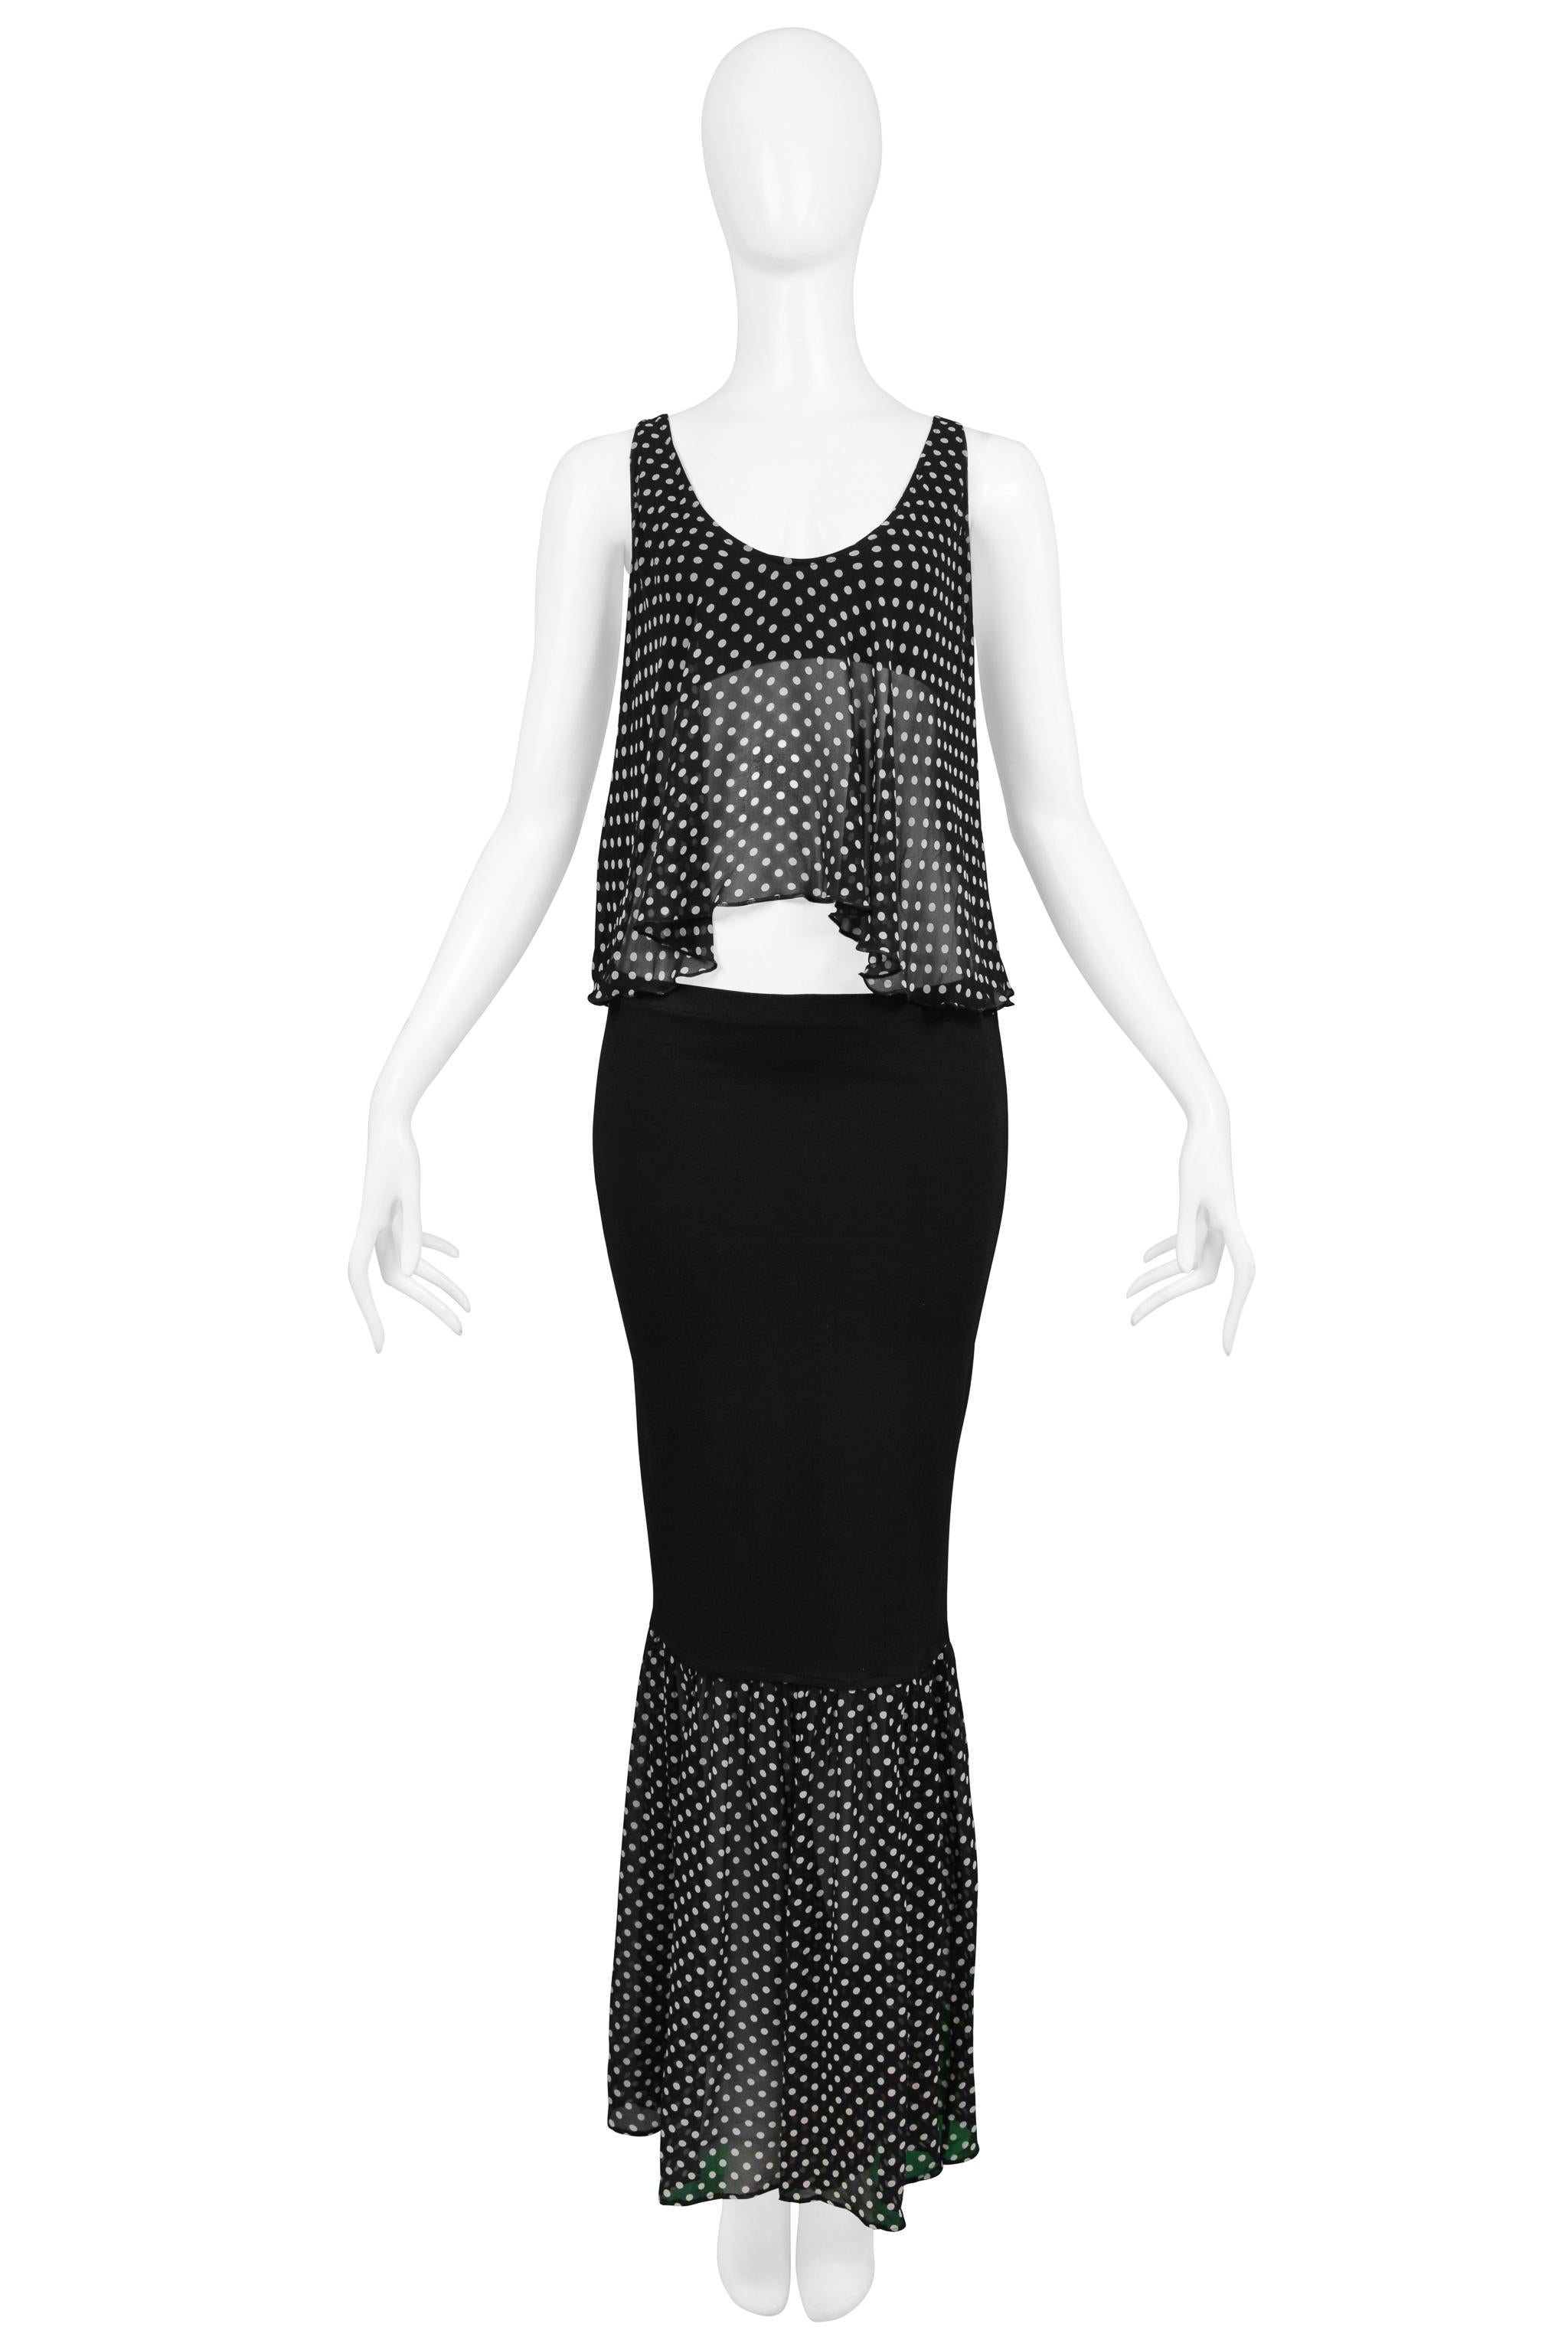 Dolce & Gabbana Black And White Polka Dot Skirt Ensemble In Good Condition For Sale In Los Angeles, CA